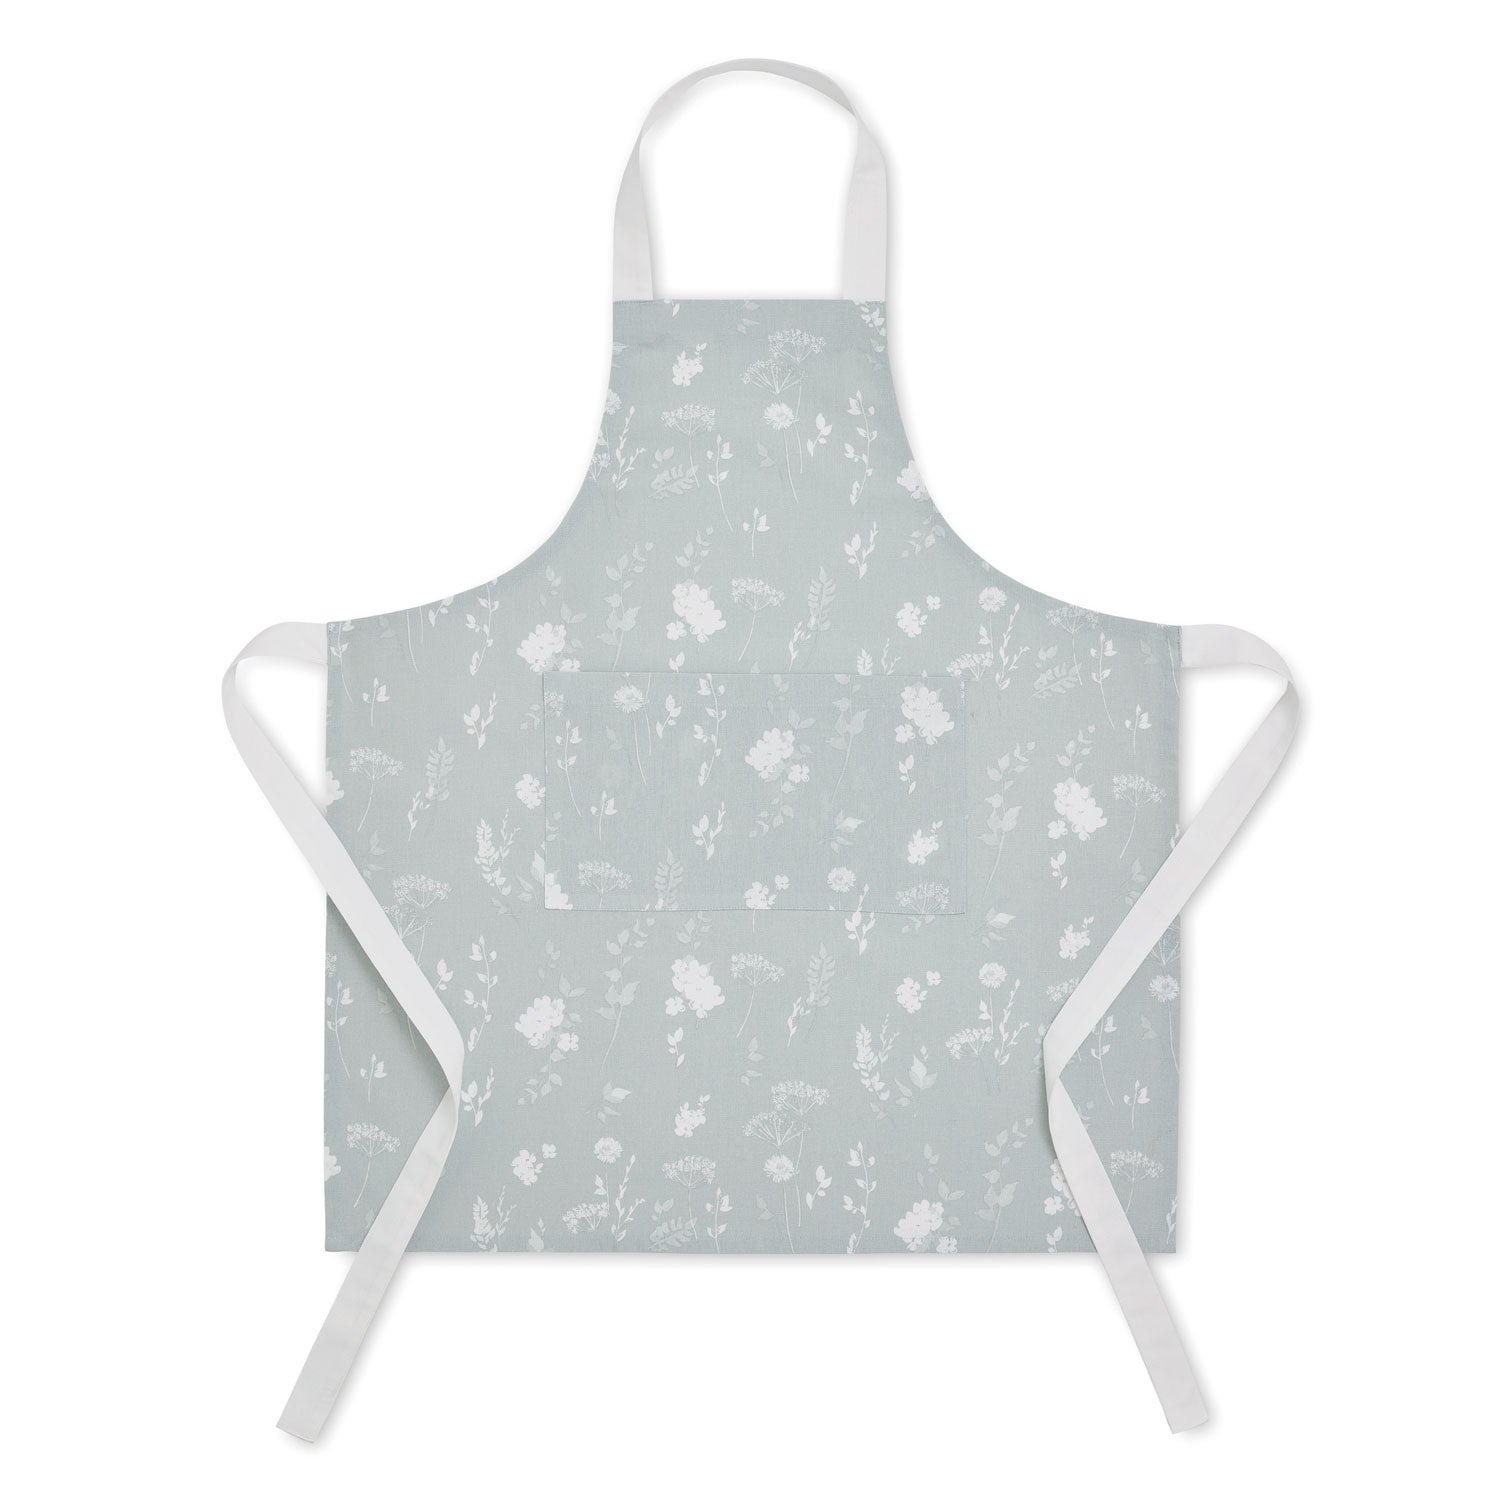 Catherine Lansfield Dining Meadowsweet Floral Adult Apron - Green 1 Shaws Department Stores